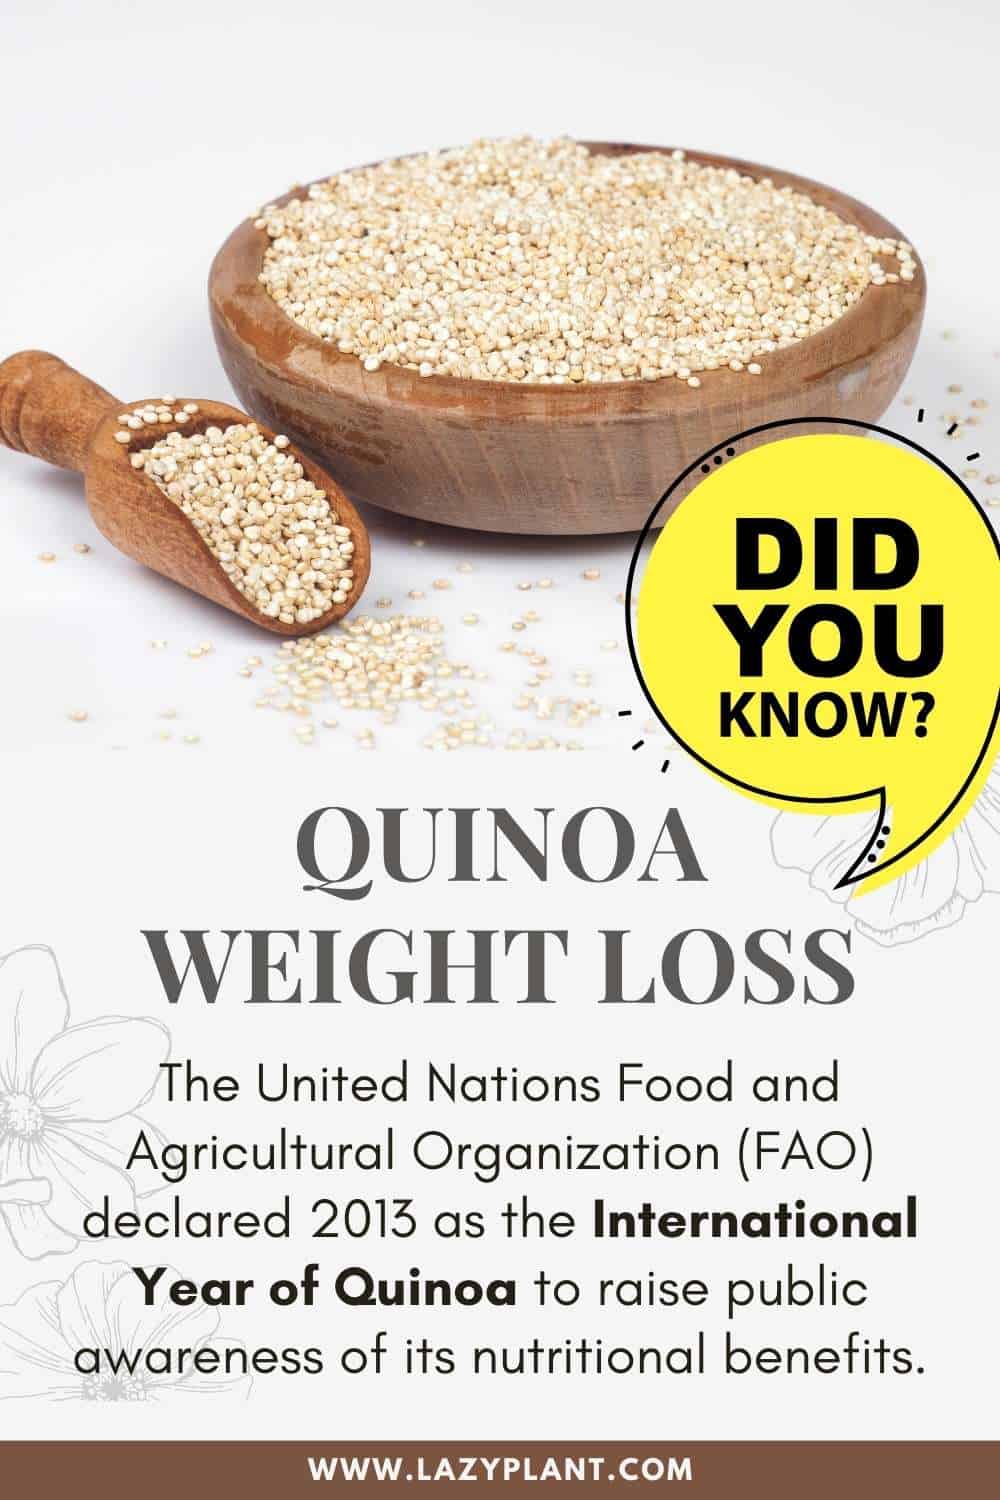 The United Nations Food and Agricultural Organization (FAO) declared 2013 as the International Year of Quinoa to raise public awareness of its nutritional benefits.